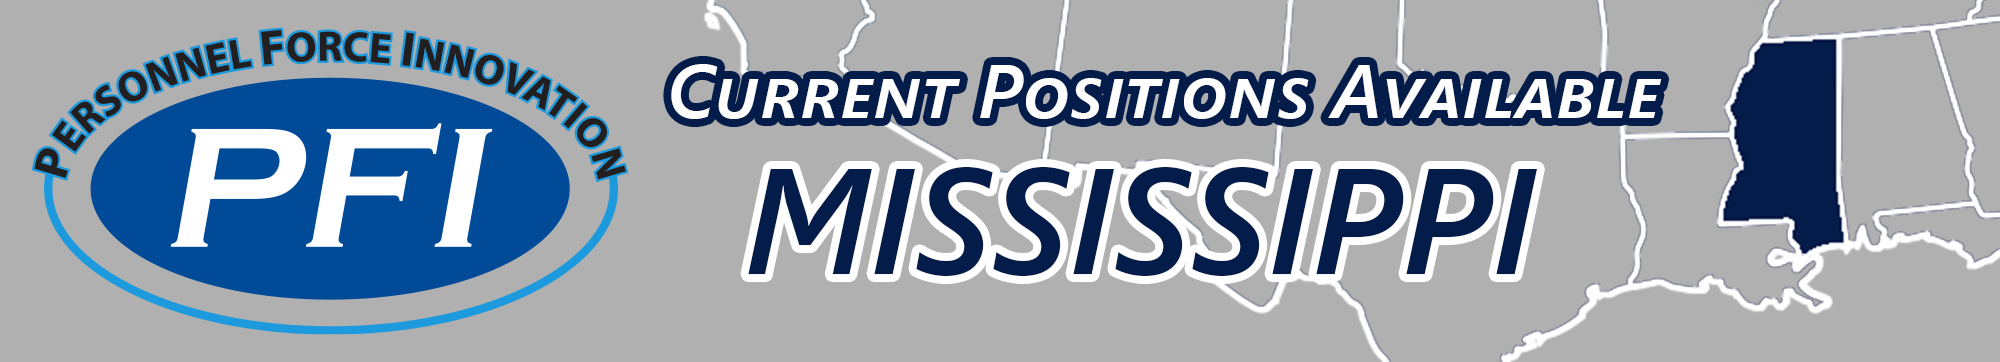 Decorative banner that says Personnel Force Innovation (PFI) current positions available in Mississippi